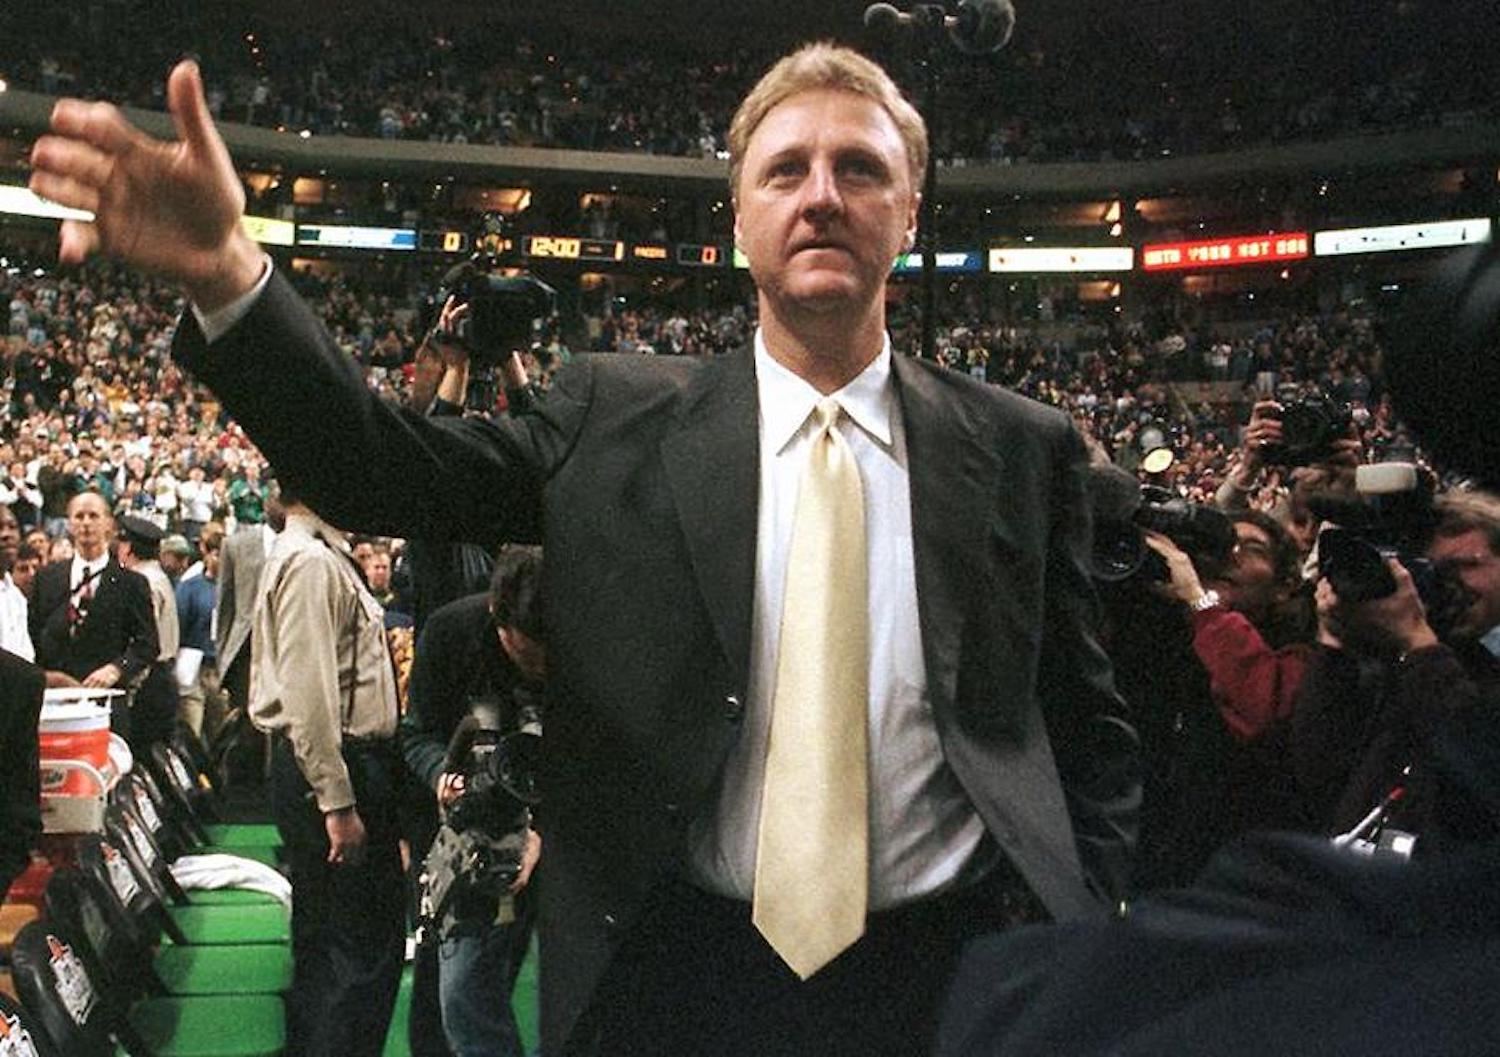 Larry Bird gives the Boston crowd a thumbs up during his time with the Indiana Pacers.